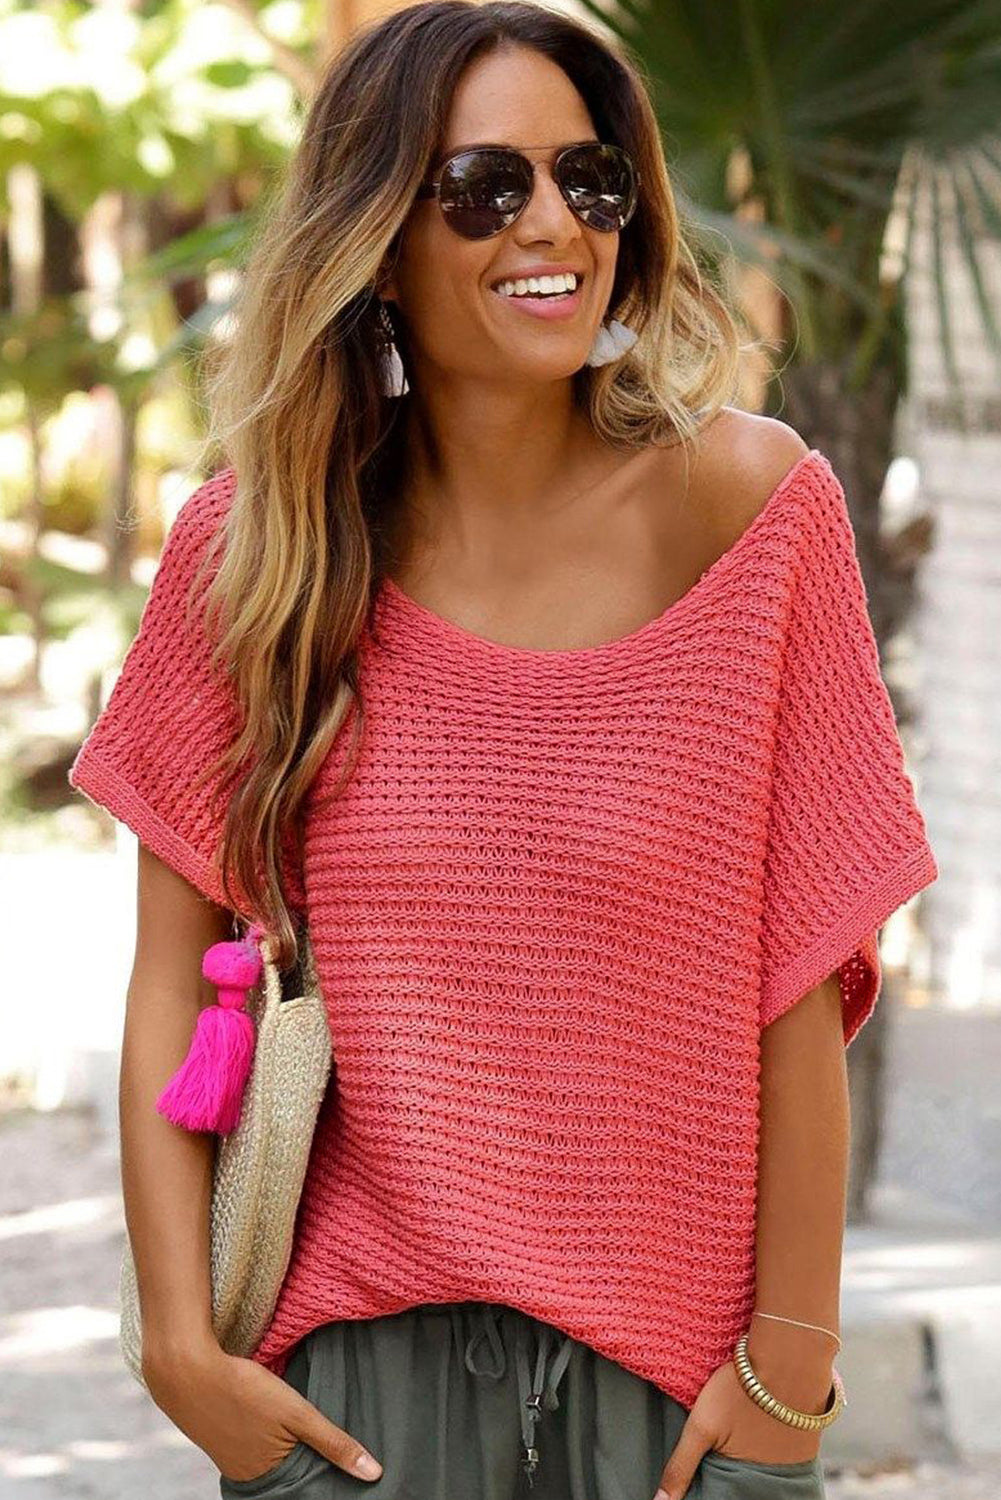 Red Clay Solid Loose Knit Short Dolman Sleeve Sweater